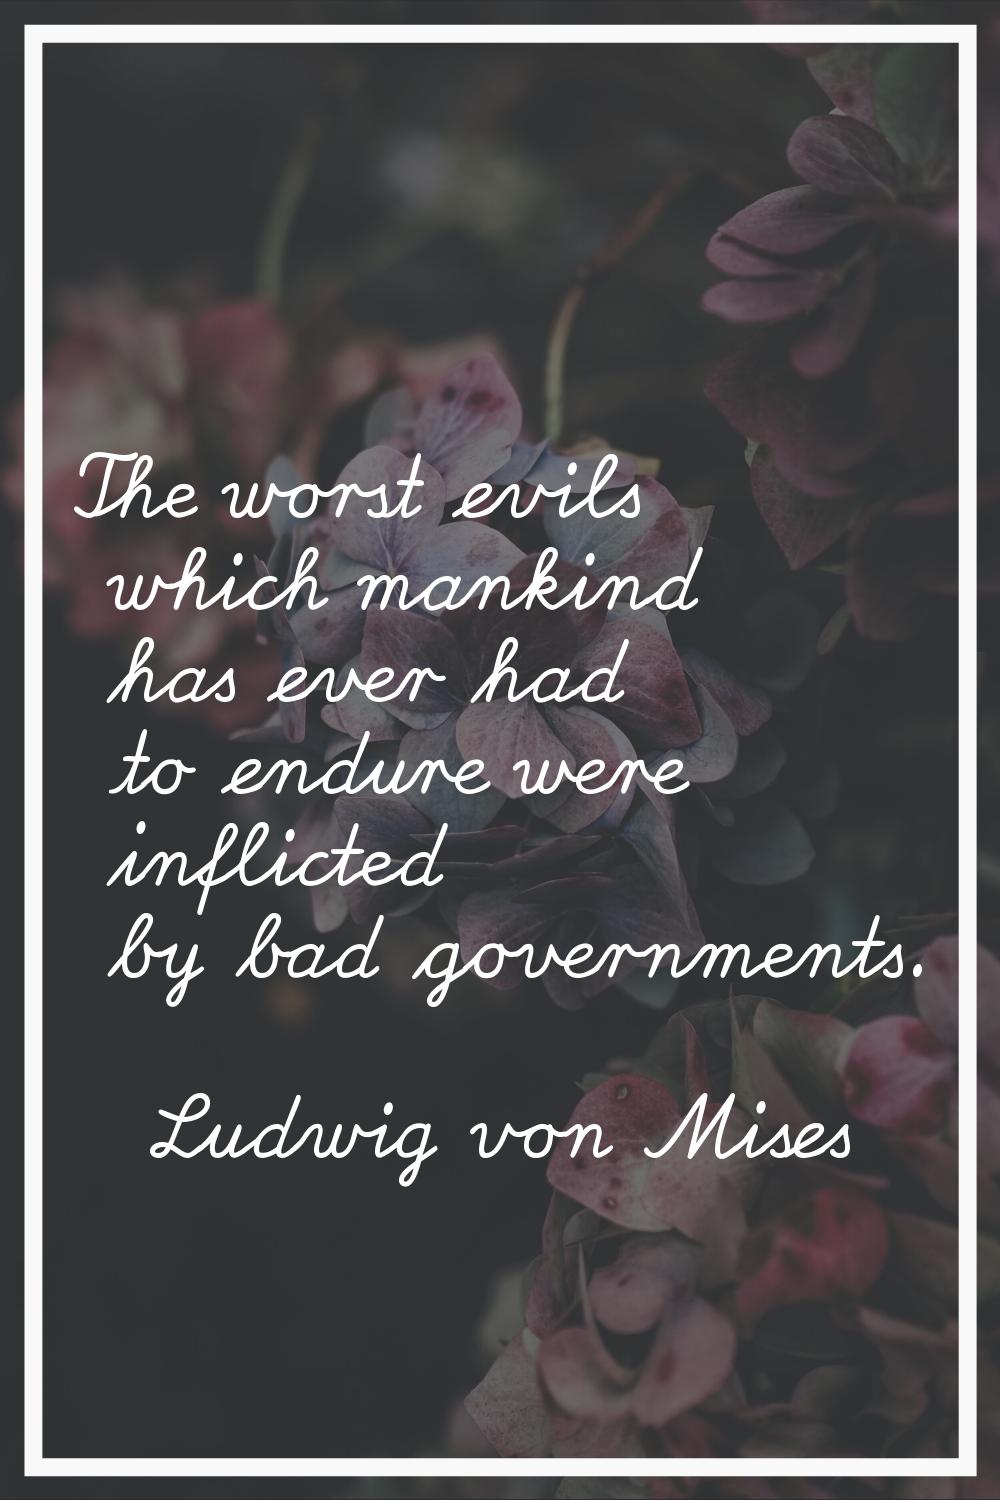 The worst evils which mankind has ever had to endure were inflicted by bad governments.